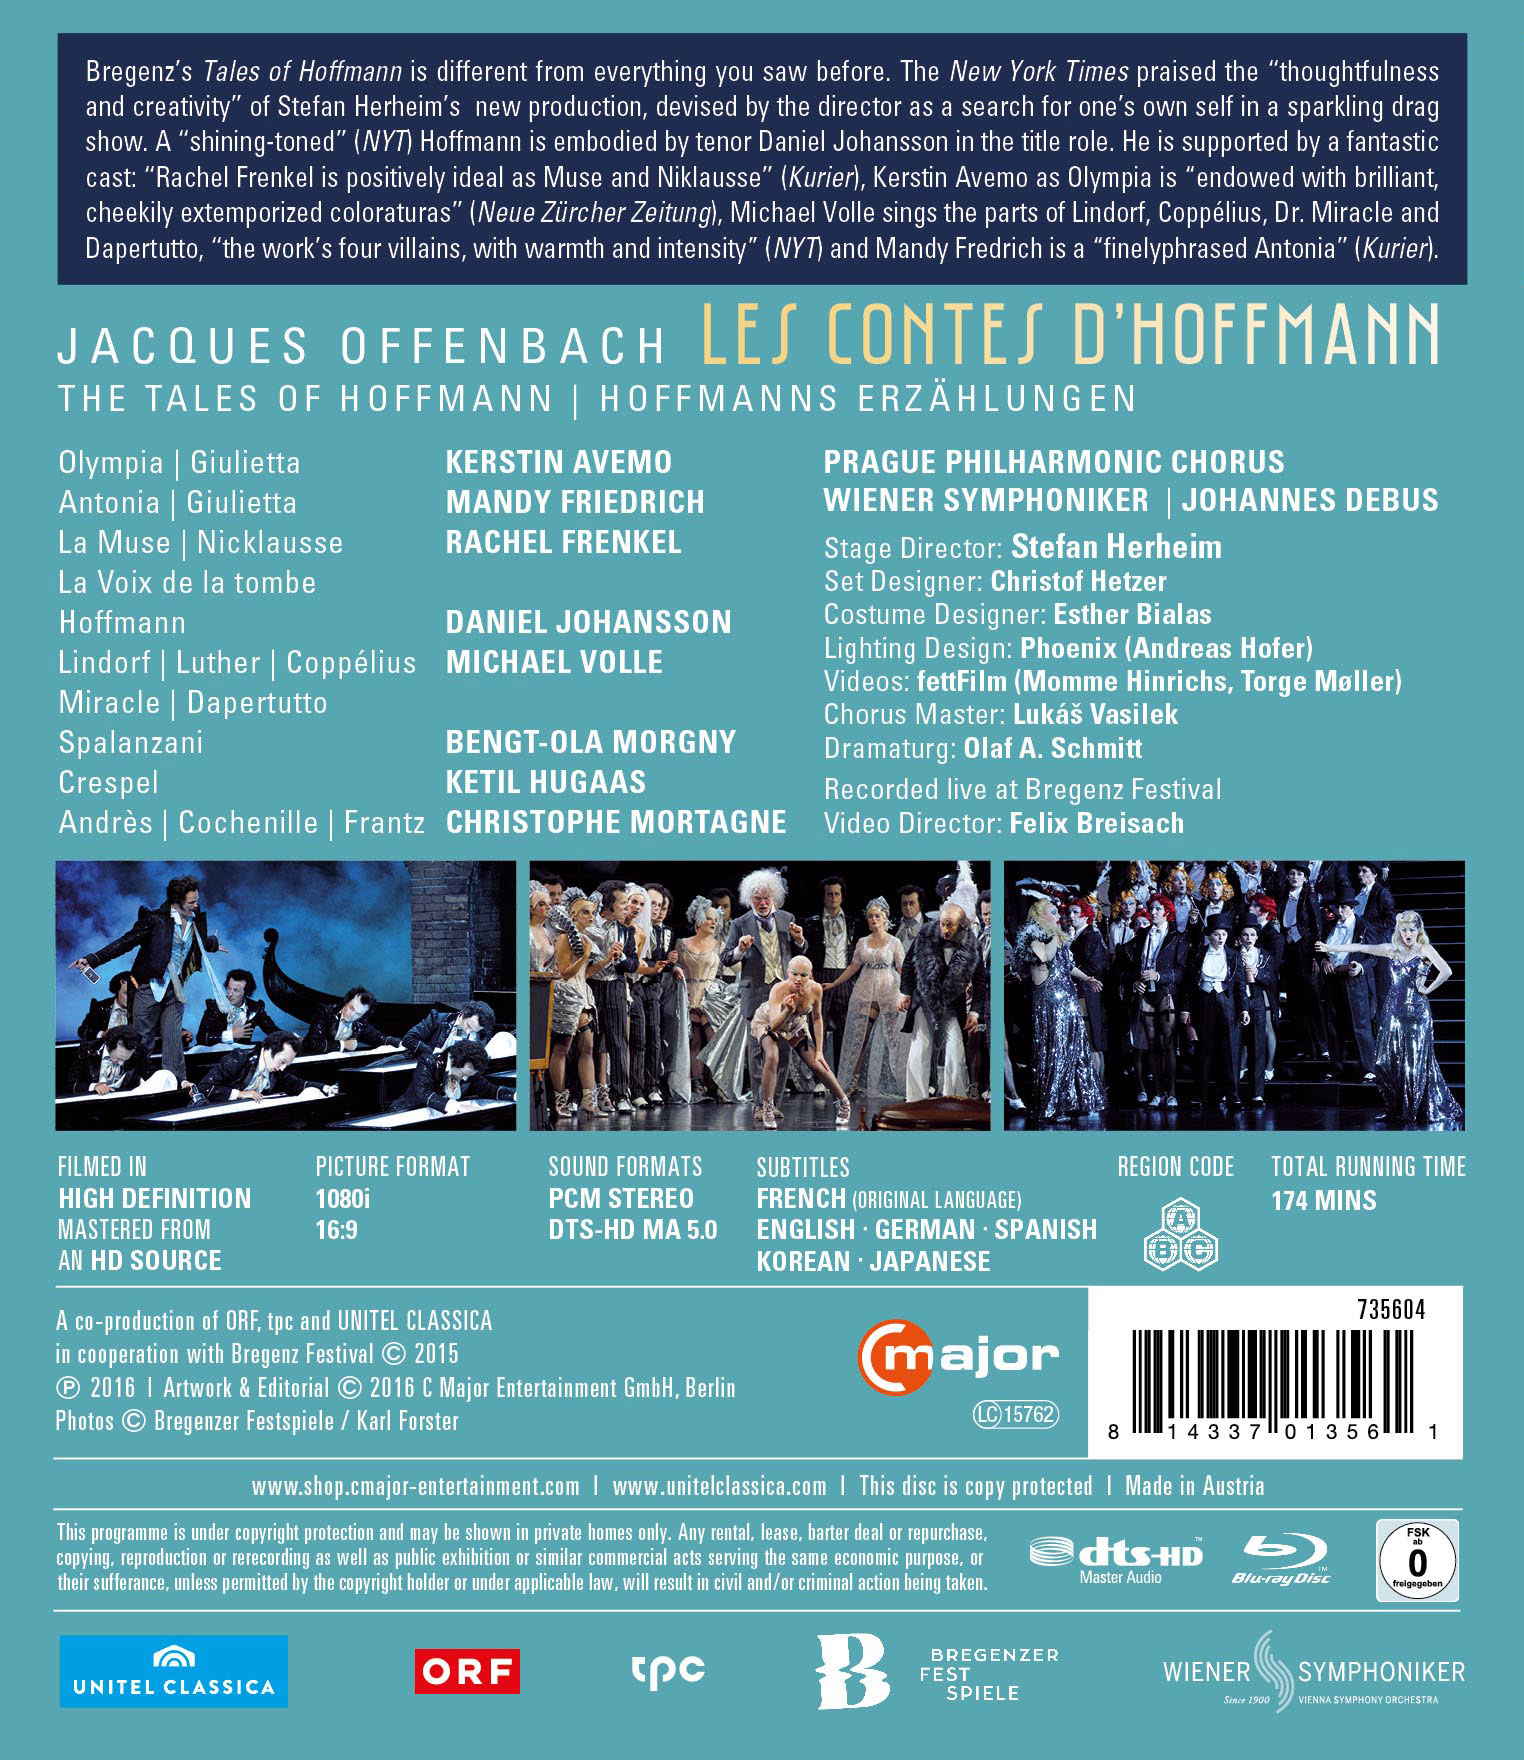 Offenbach: Les Contes D'Hoffmann (C Major Entertainment/735604) Blu-ray Disc back cover insert